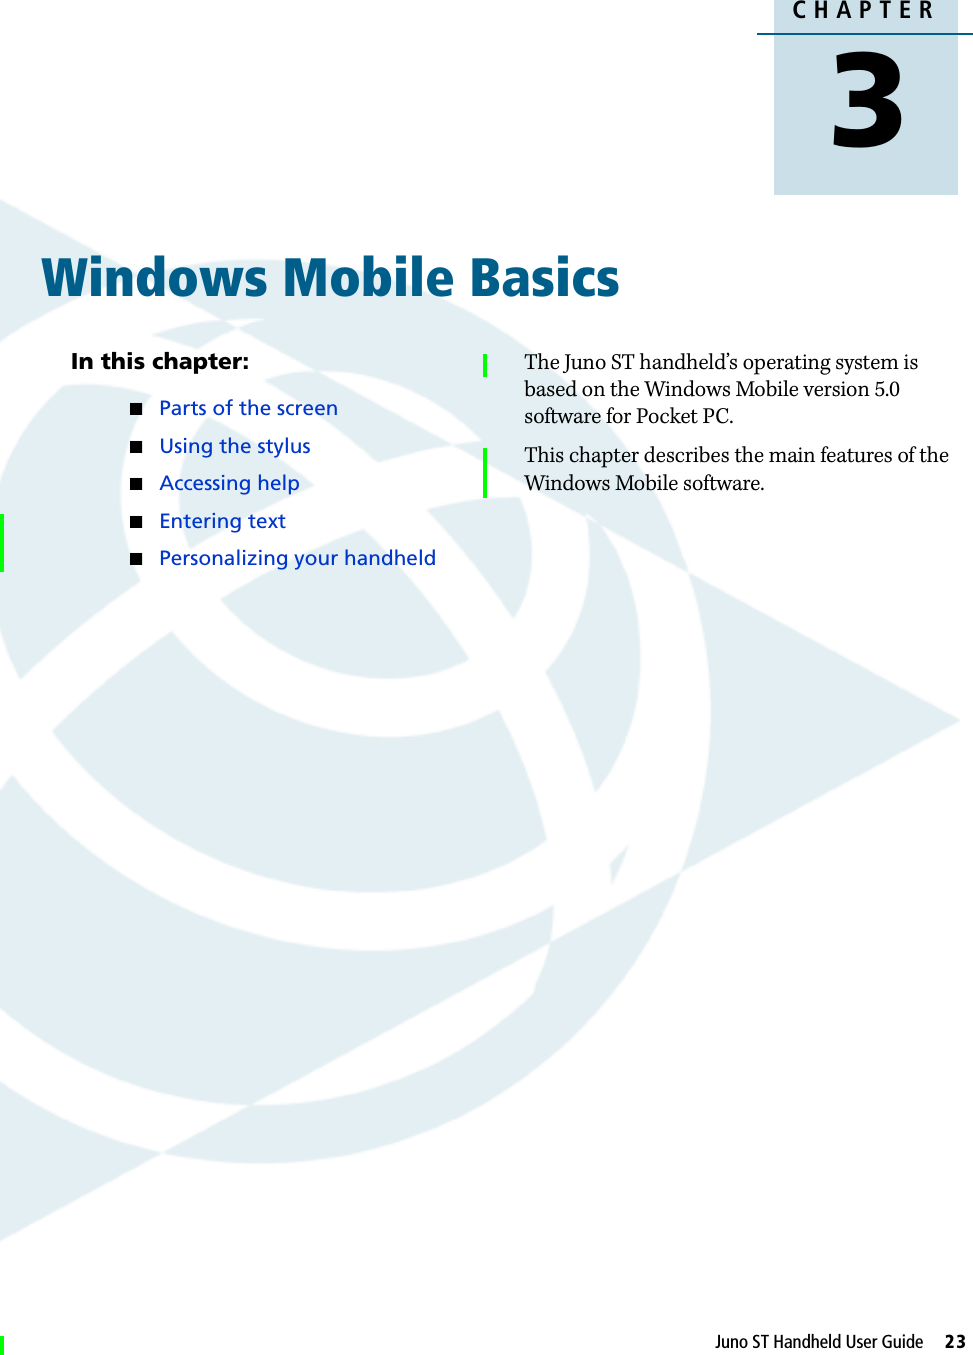 DraftCHAPTER3Juno ST Handheld User Guide     23Windows Mobile Basics 3In this chapter:QParts of the screenQUsing the stylusQAccessing helpQEntering textQPersonalizing your handheldThe Juno ST handheld’s operating system is based on the Windows Mobile version 5.0 software for Pocket PC.This chapter describes the main features of the Windows Mobile software.